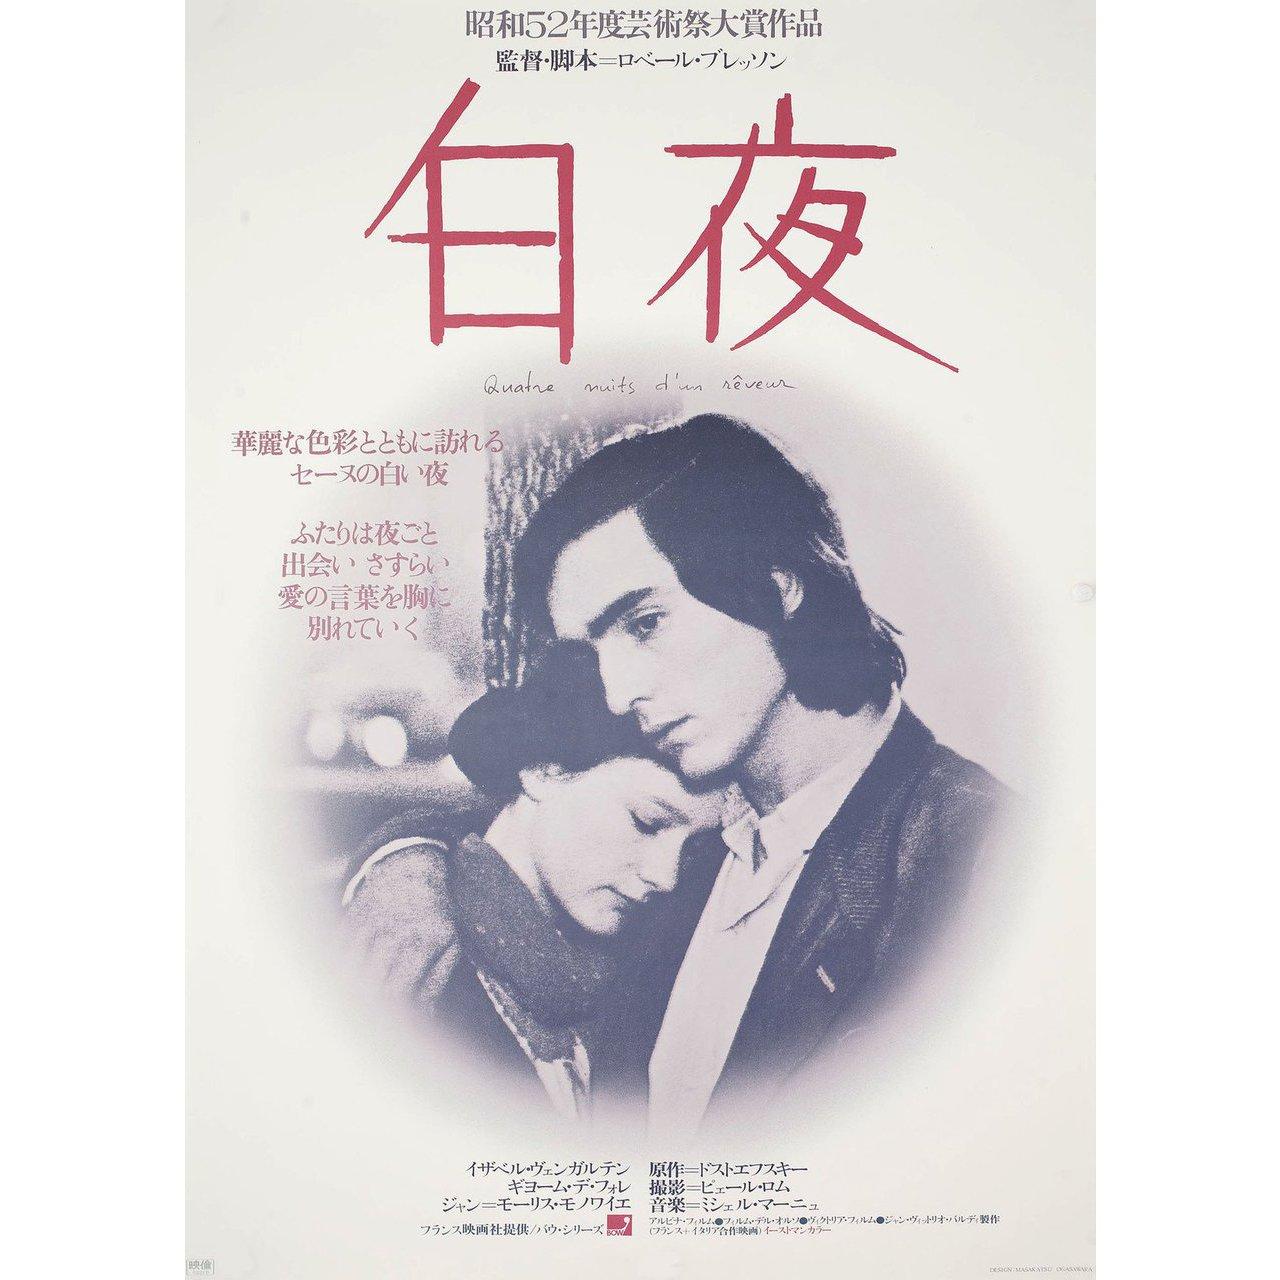 Original 1977 Japanese B2 poster by Masakatsu Ogasawara for the 1971 film Four Nights of a Dreamer (Quatre nuits d'un reveur) directed by Robert Bresson with Isabelle Weingarten / Guillaume des Forets / Jean-Maurice Monnoyer / Giorgio Maulini. Fine